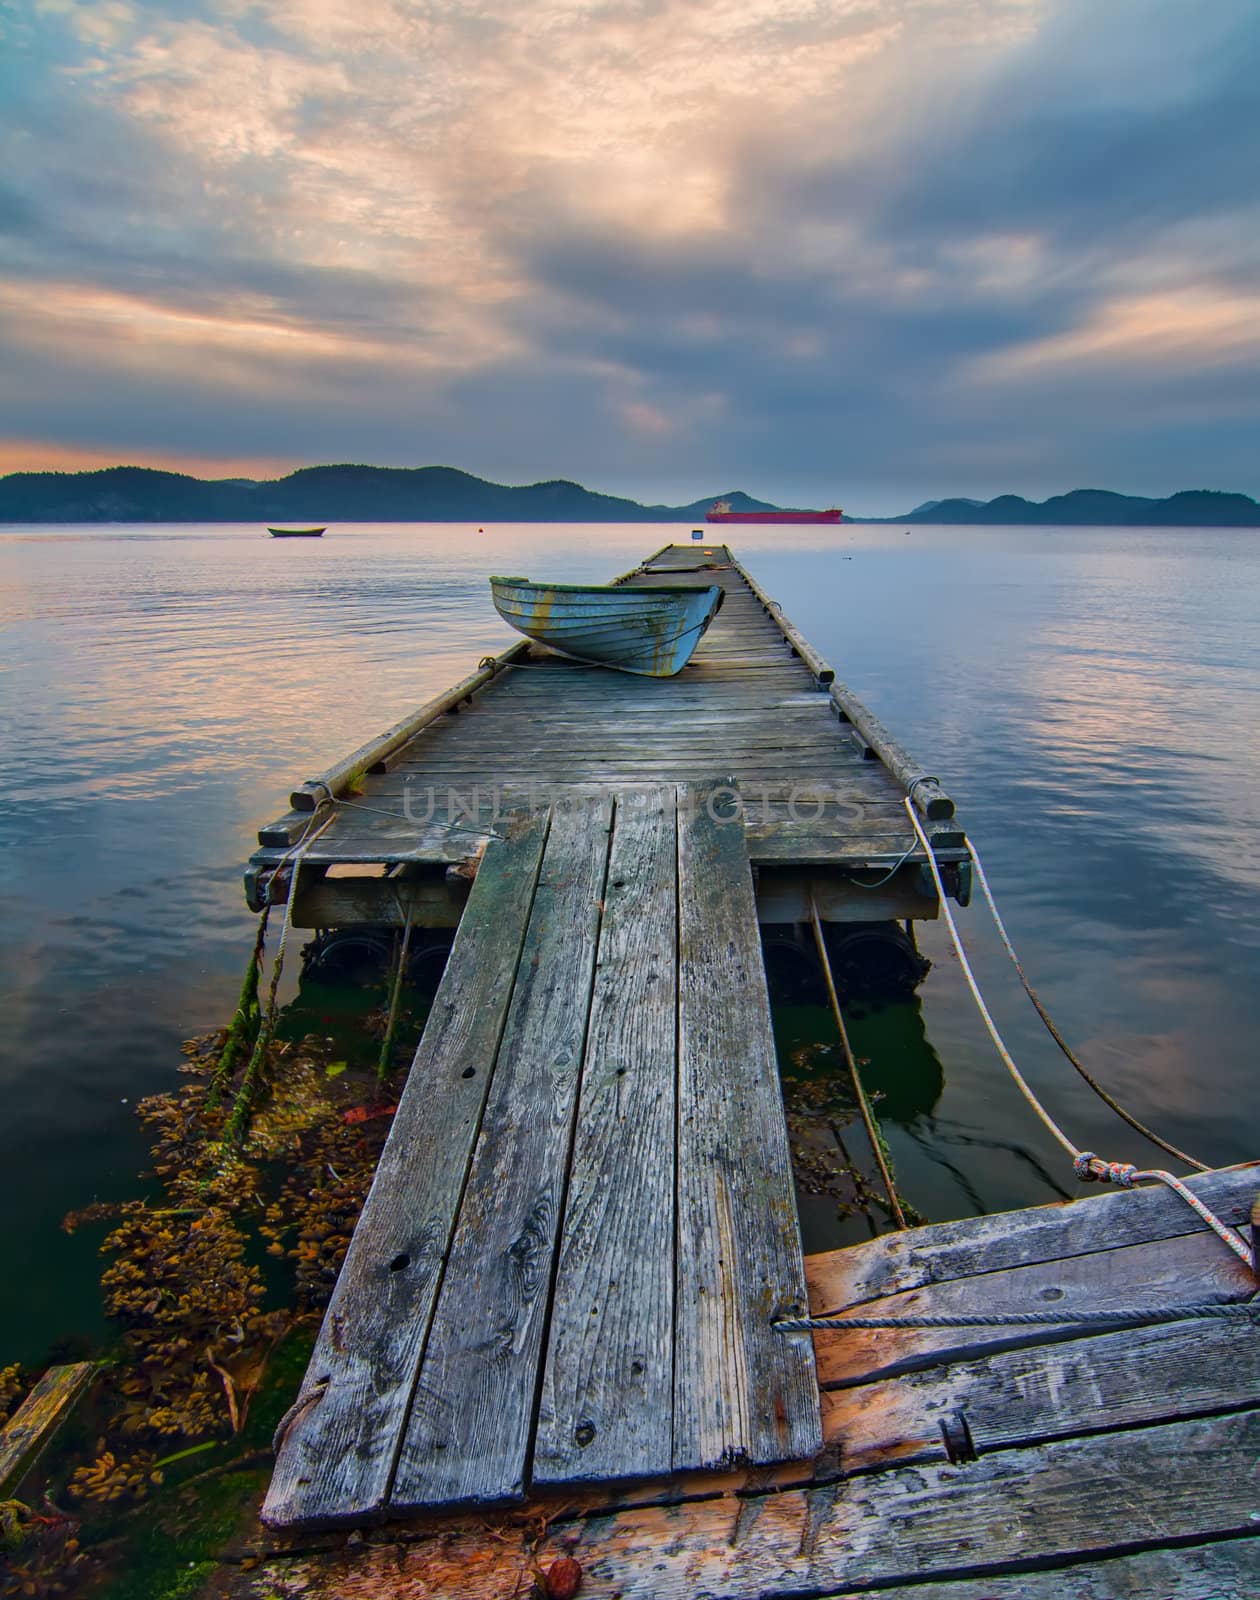 Rickety Island Dock with Mountains and Tankers in Distance by JamesWheeler